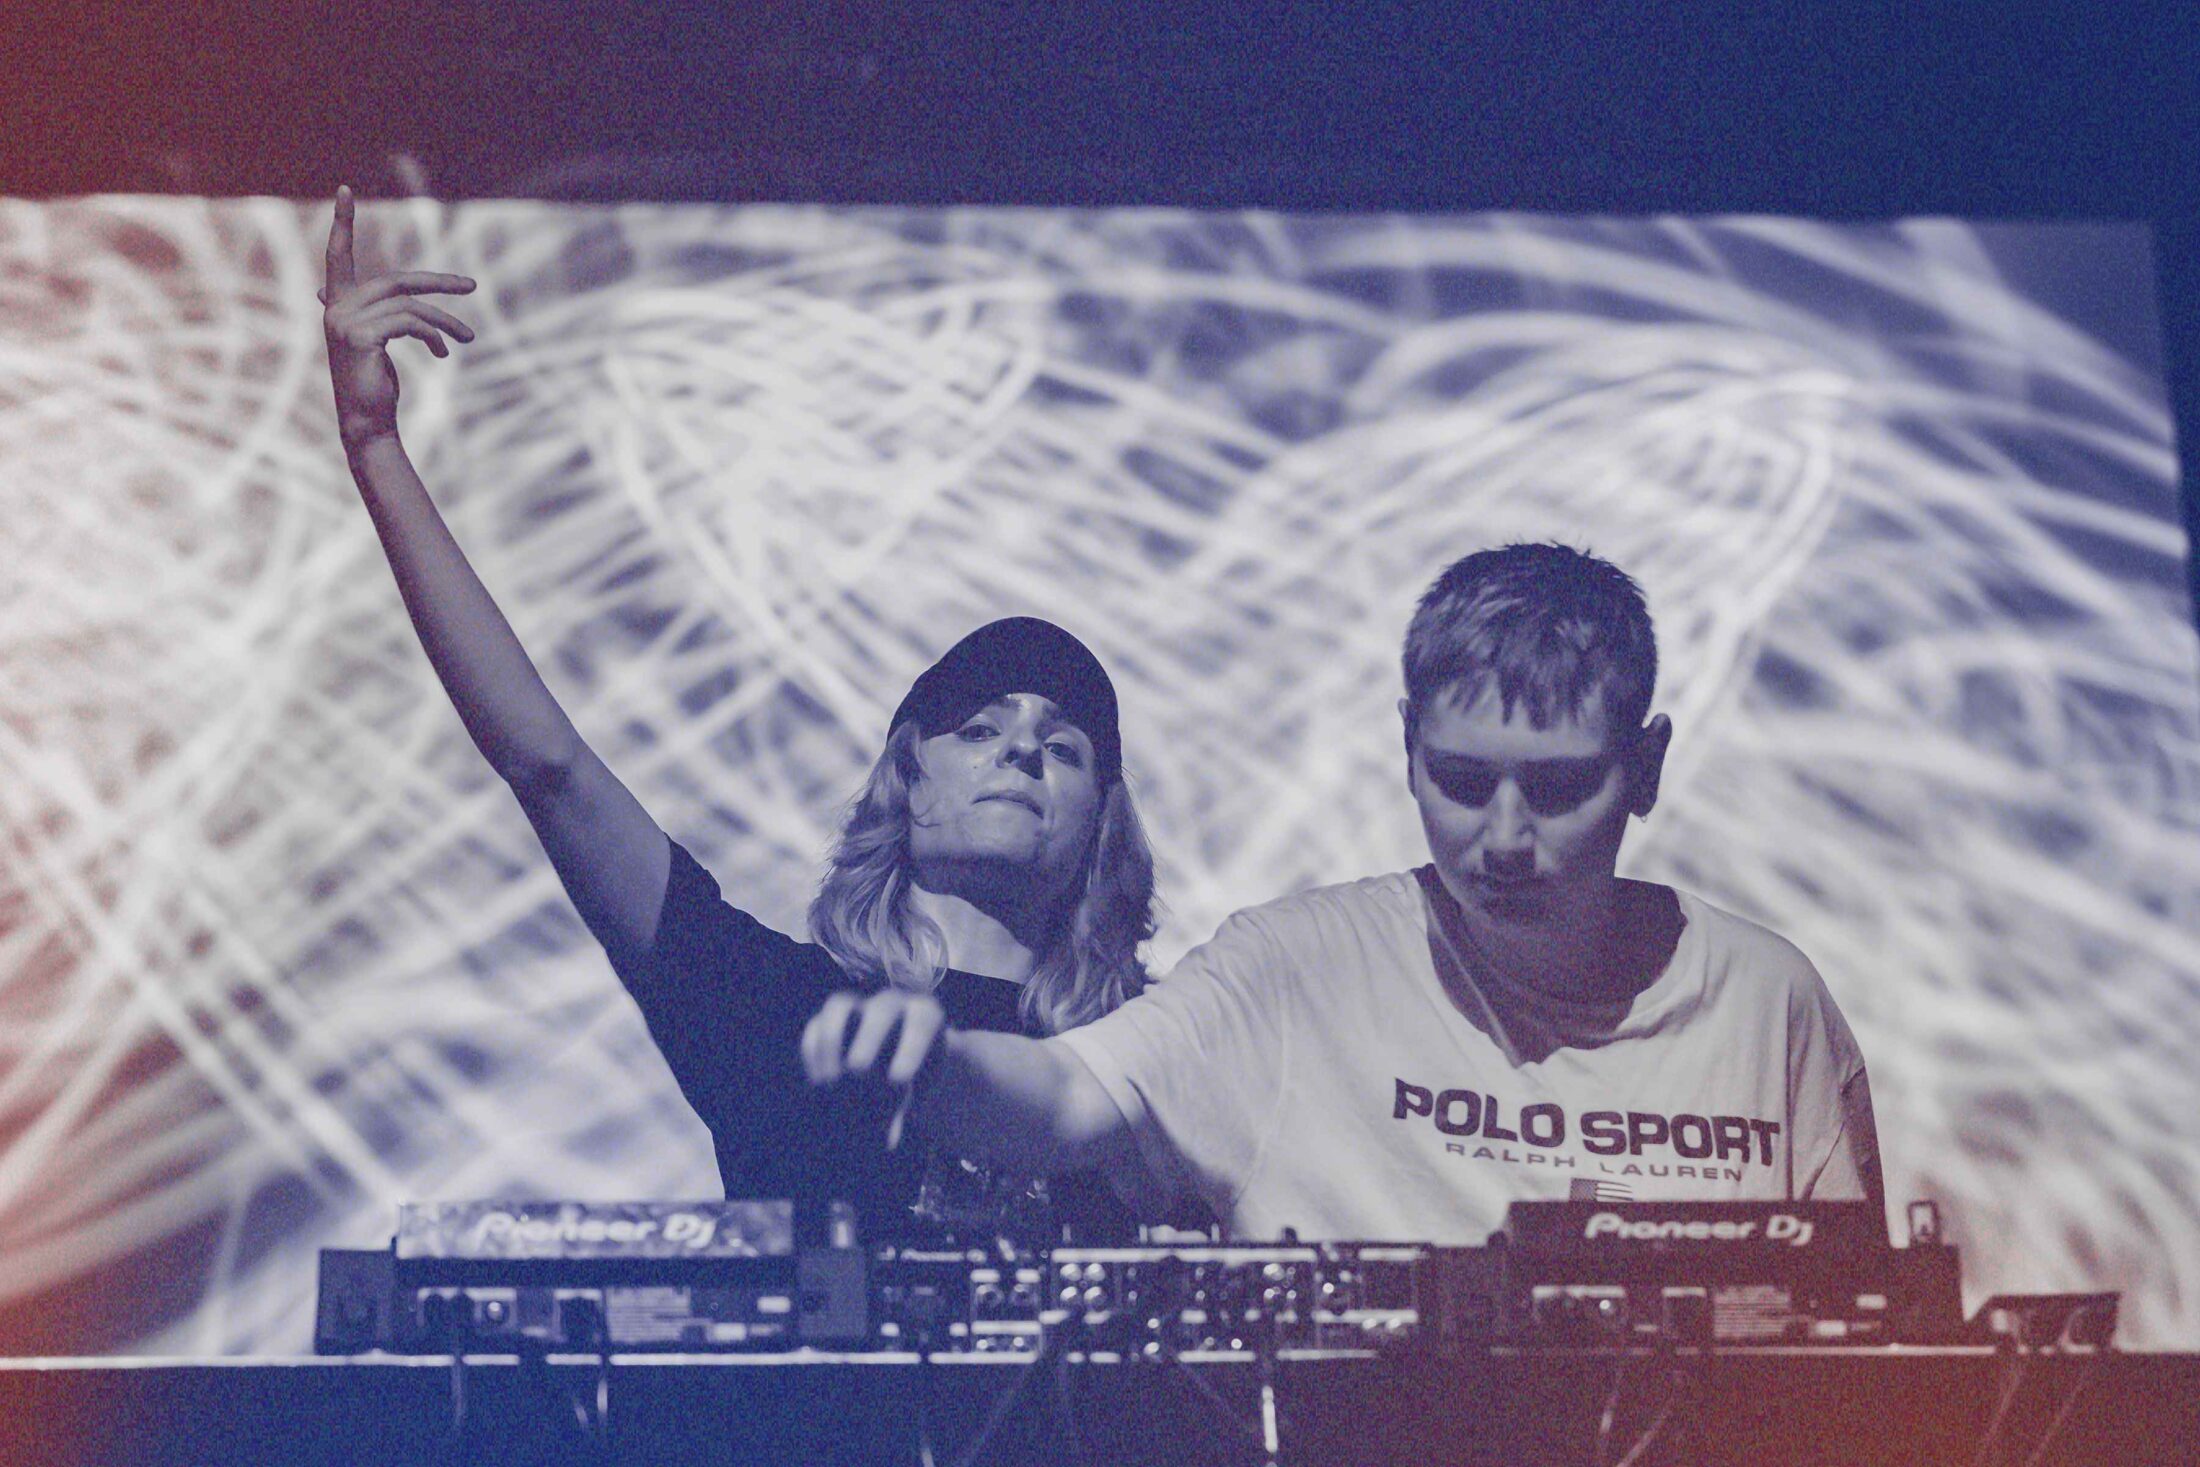 Two DJs performing a set